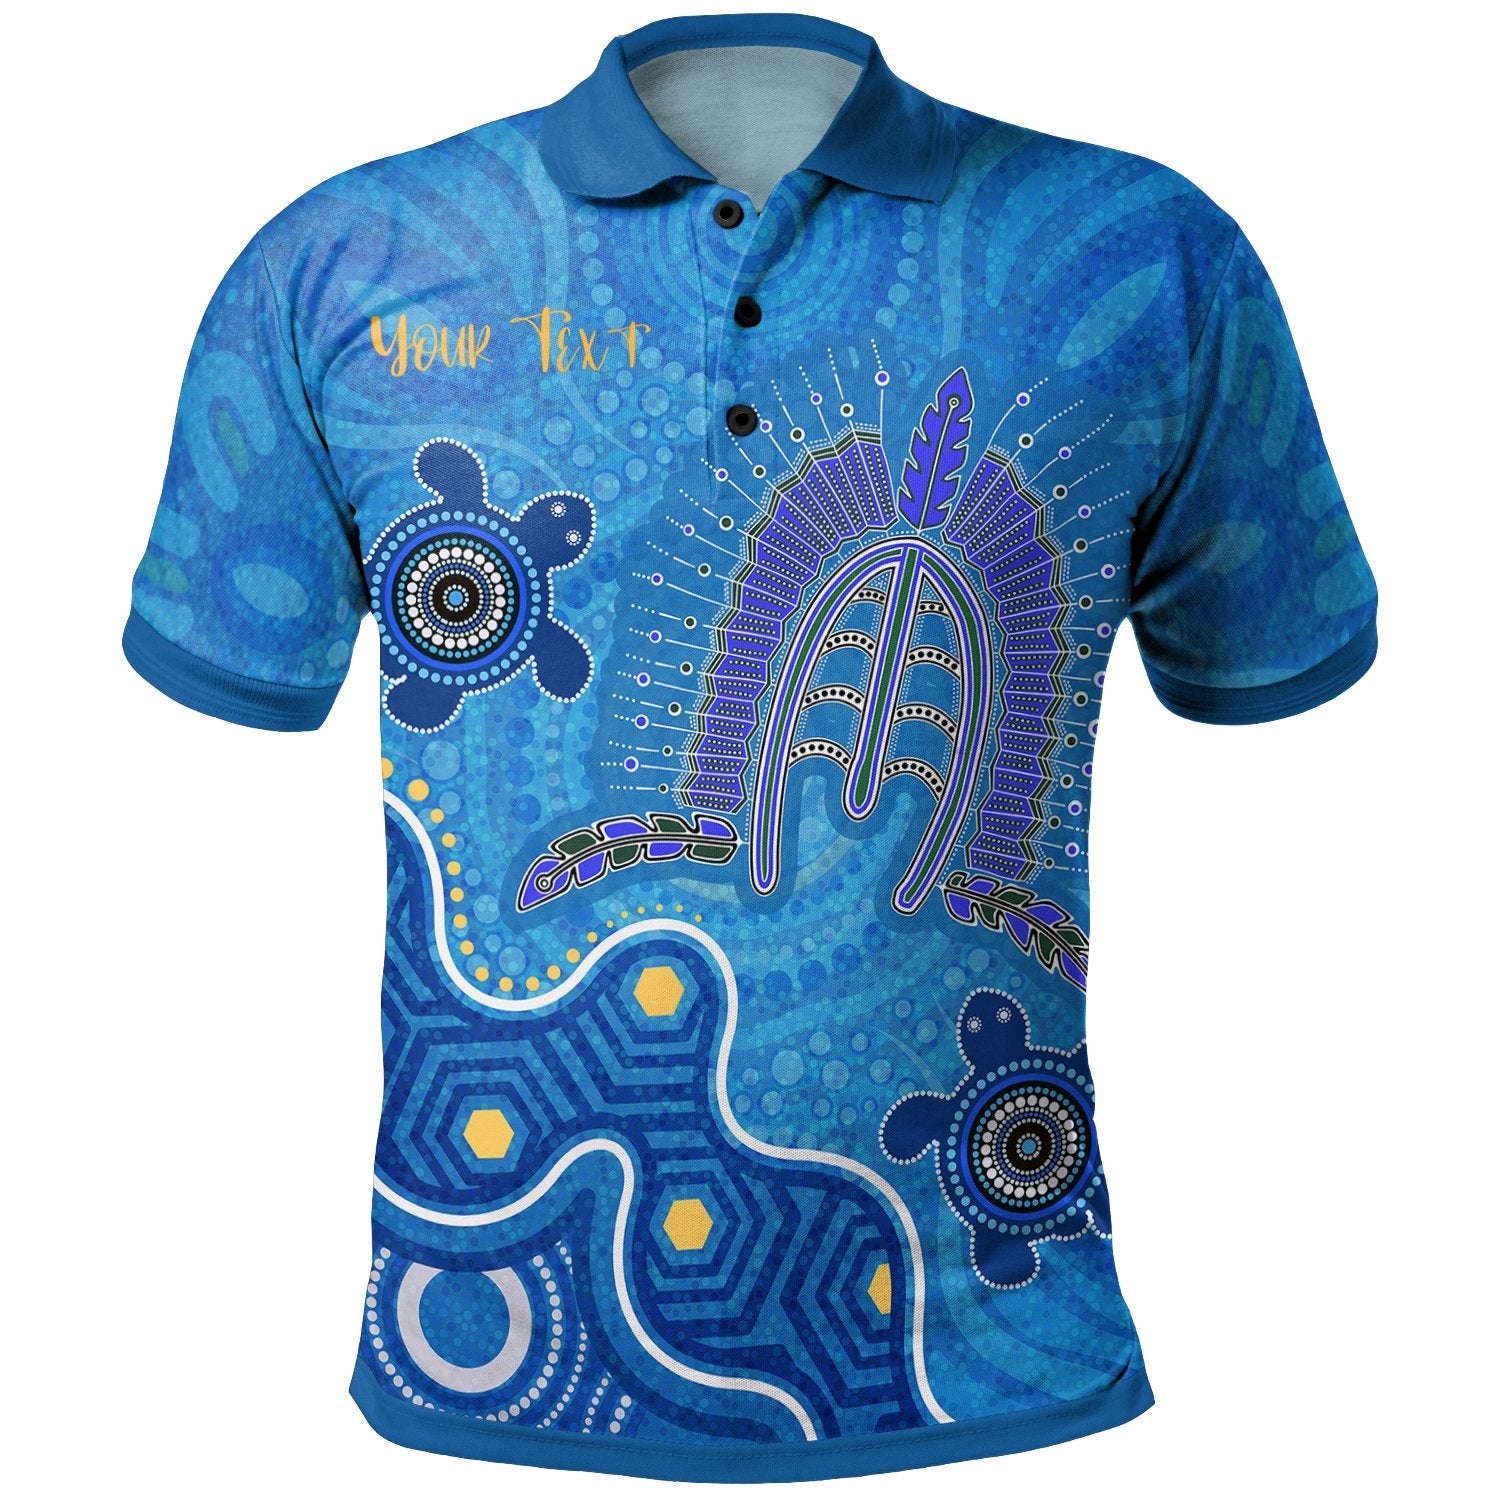 torres-strait-personalised-polo-shirt-dhari-and-turtle-bn25